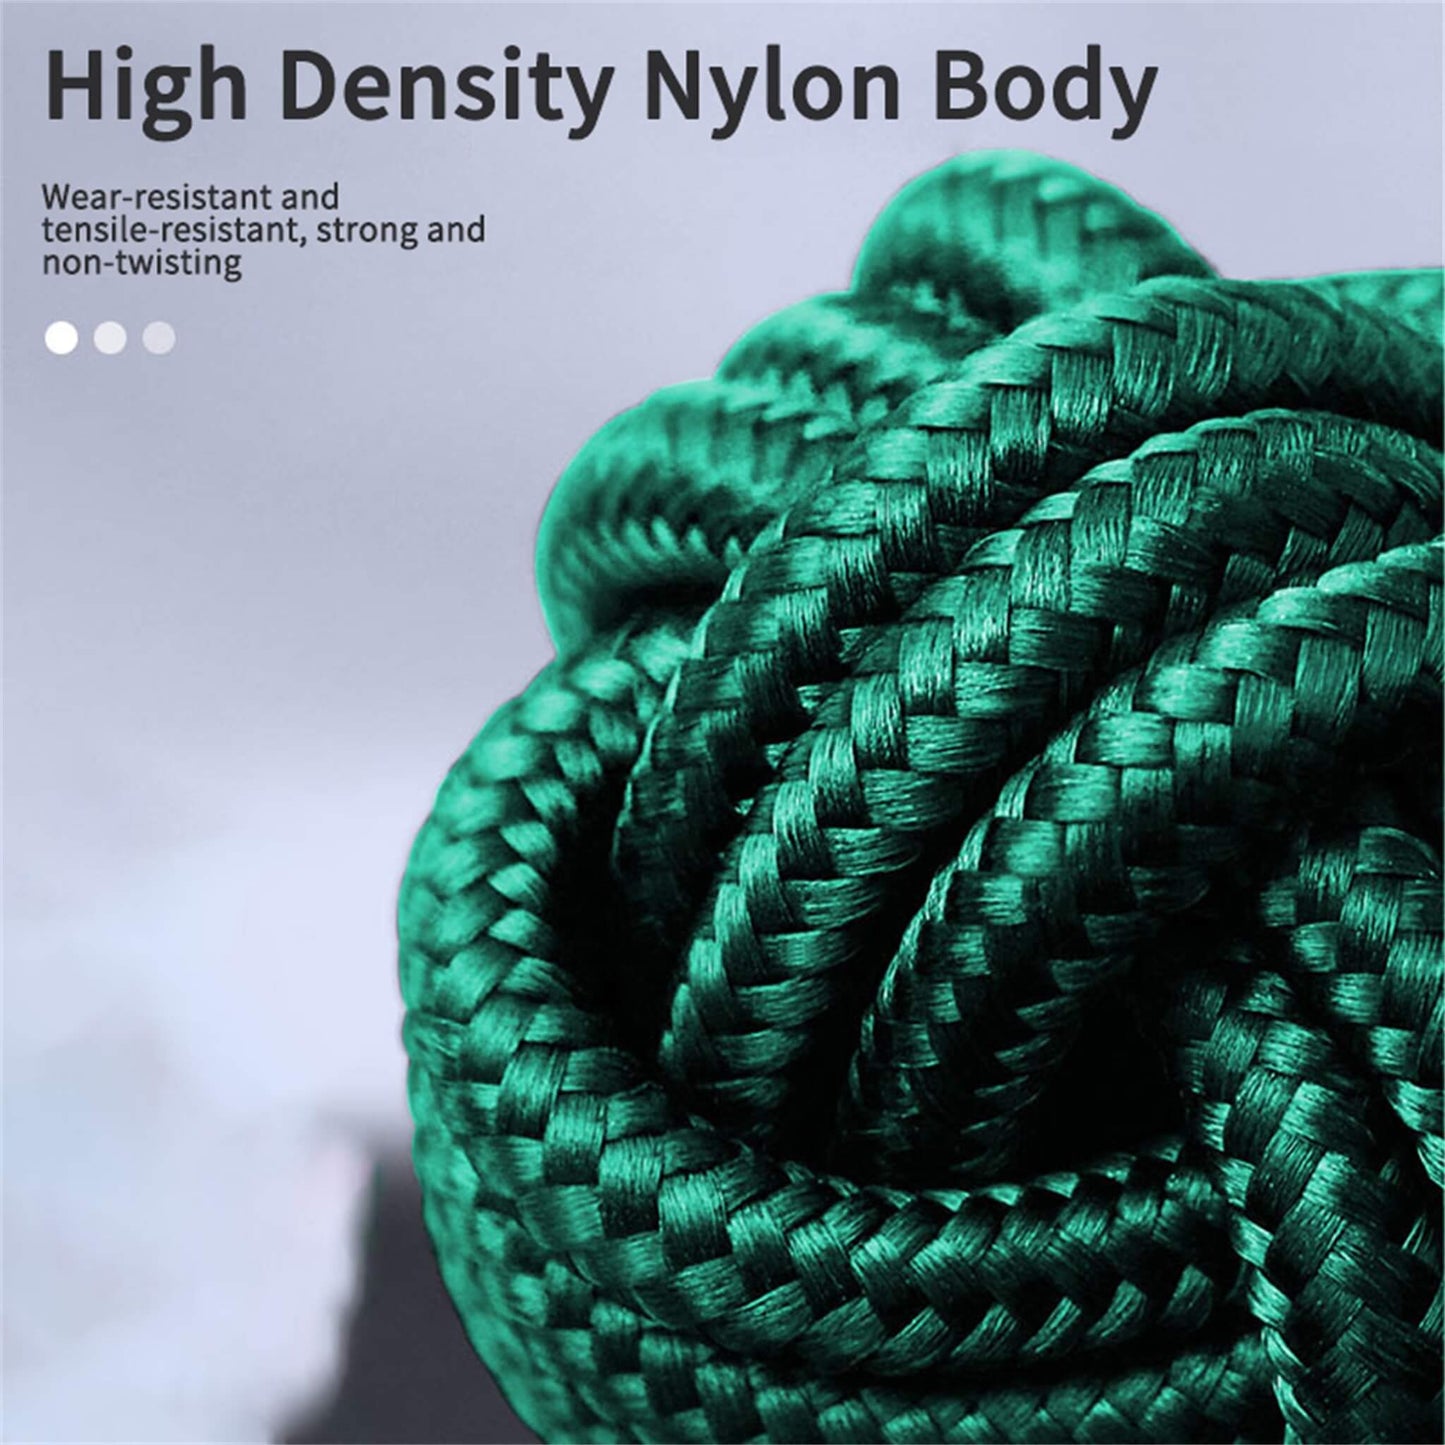 Nylon Braided 3 in 1 Multi Charging Cable